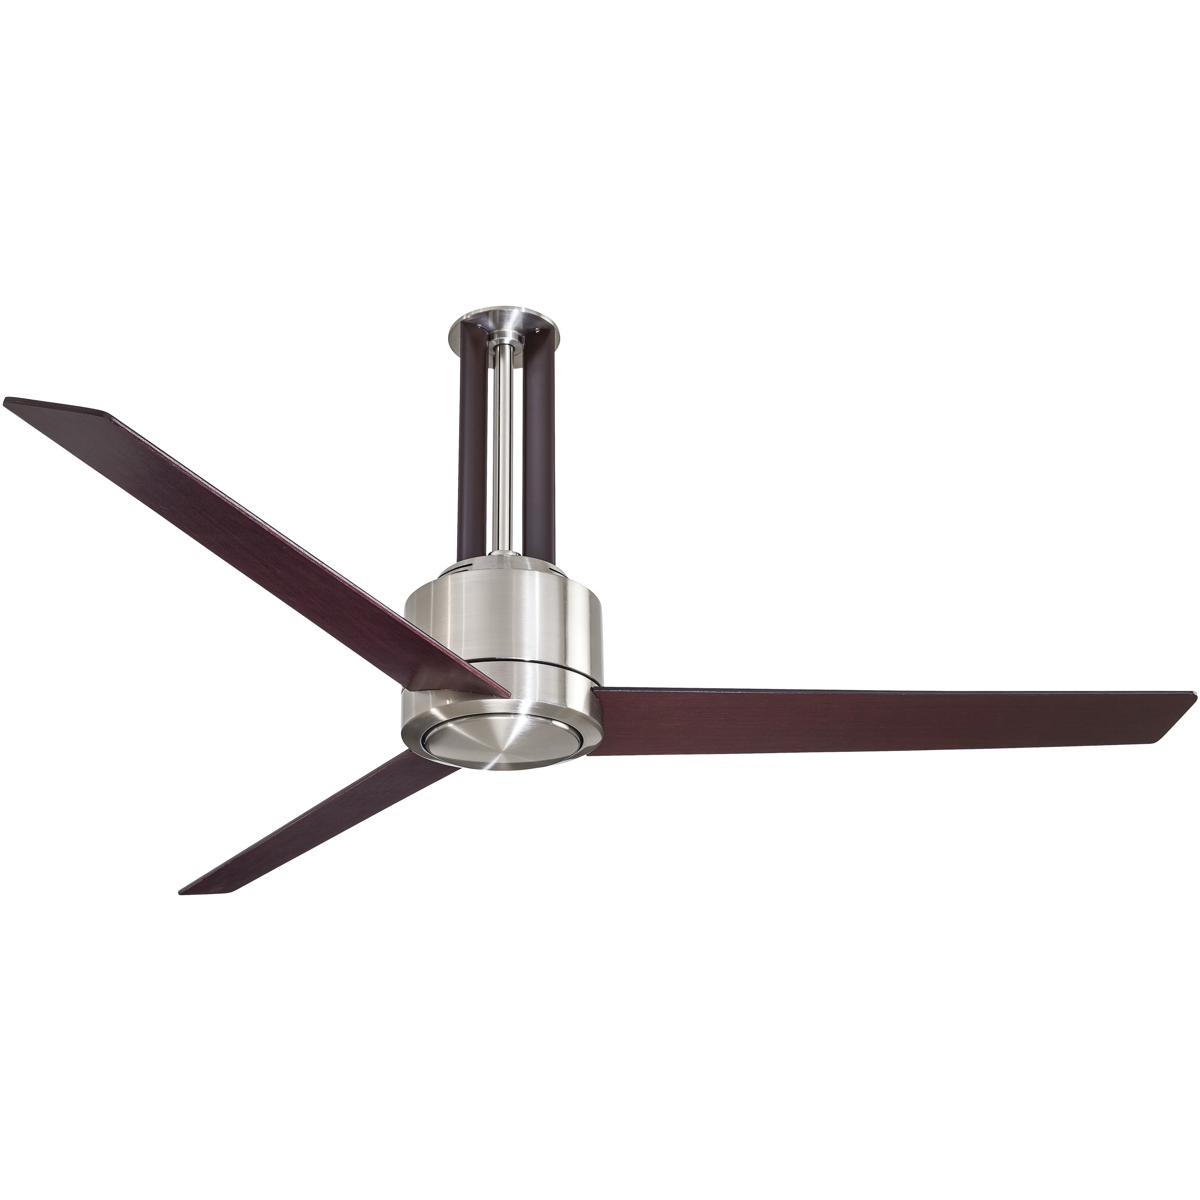 Minka-Aire F531-L-BN Flyte 56 inch Brushed Nickel with Maple Blades